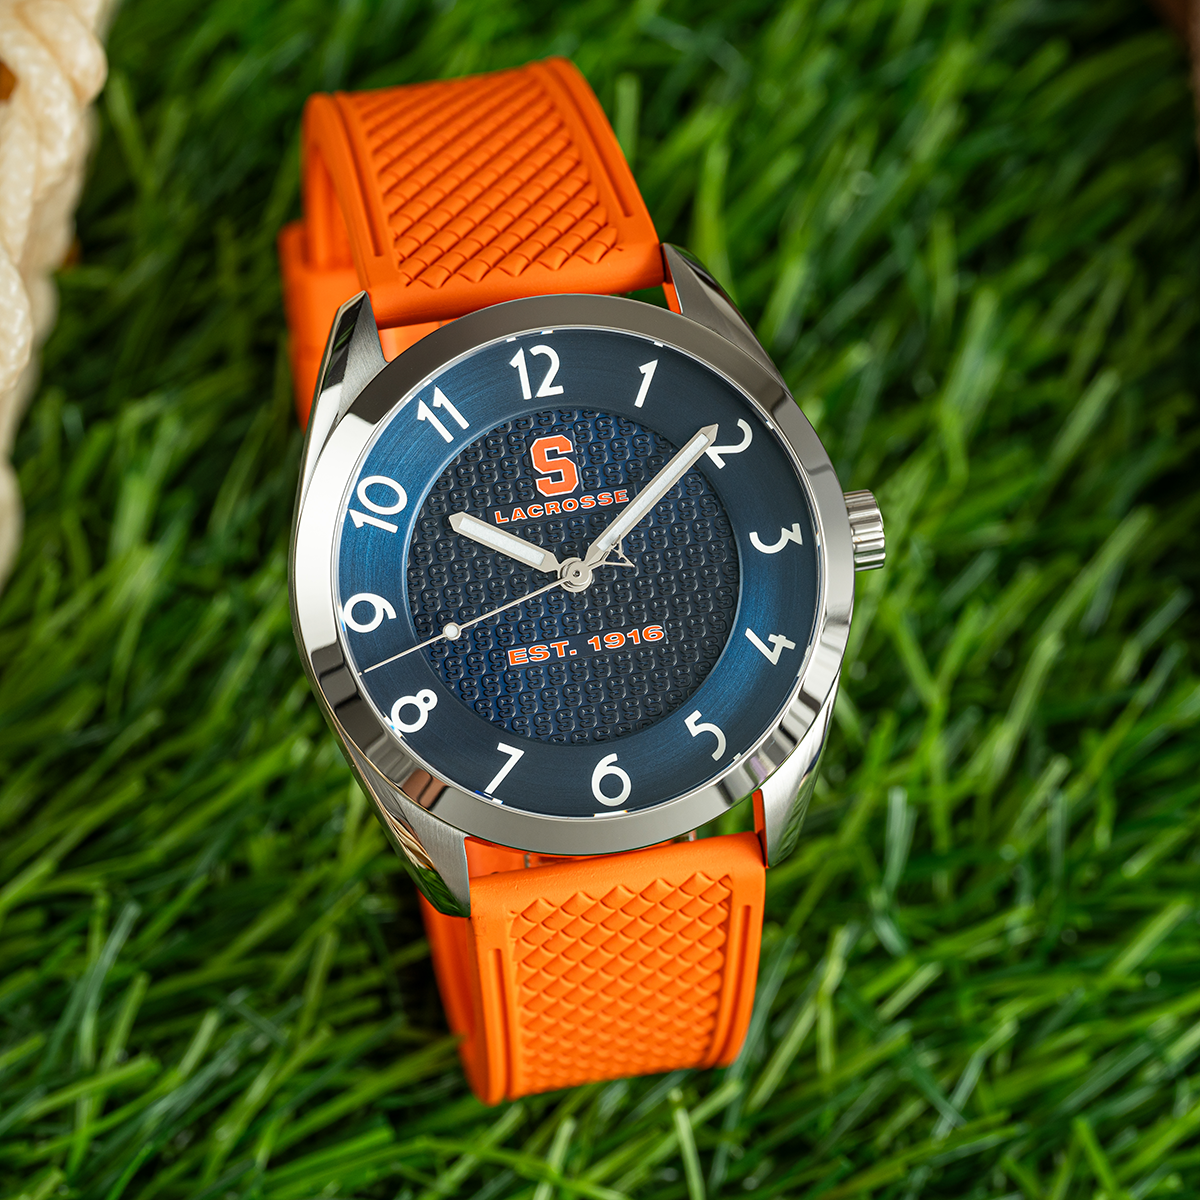 Syracuse lacrosse Swiss made automatic watch. Front view on grass with color-matched rubber strap.